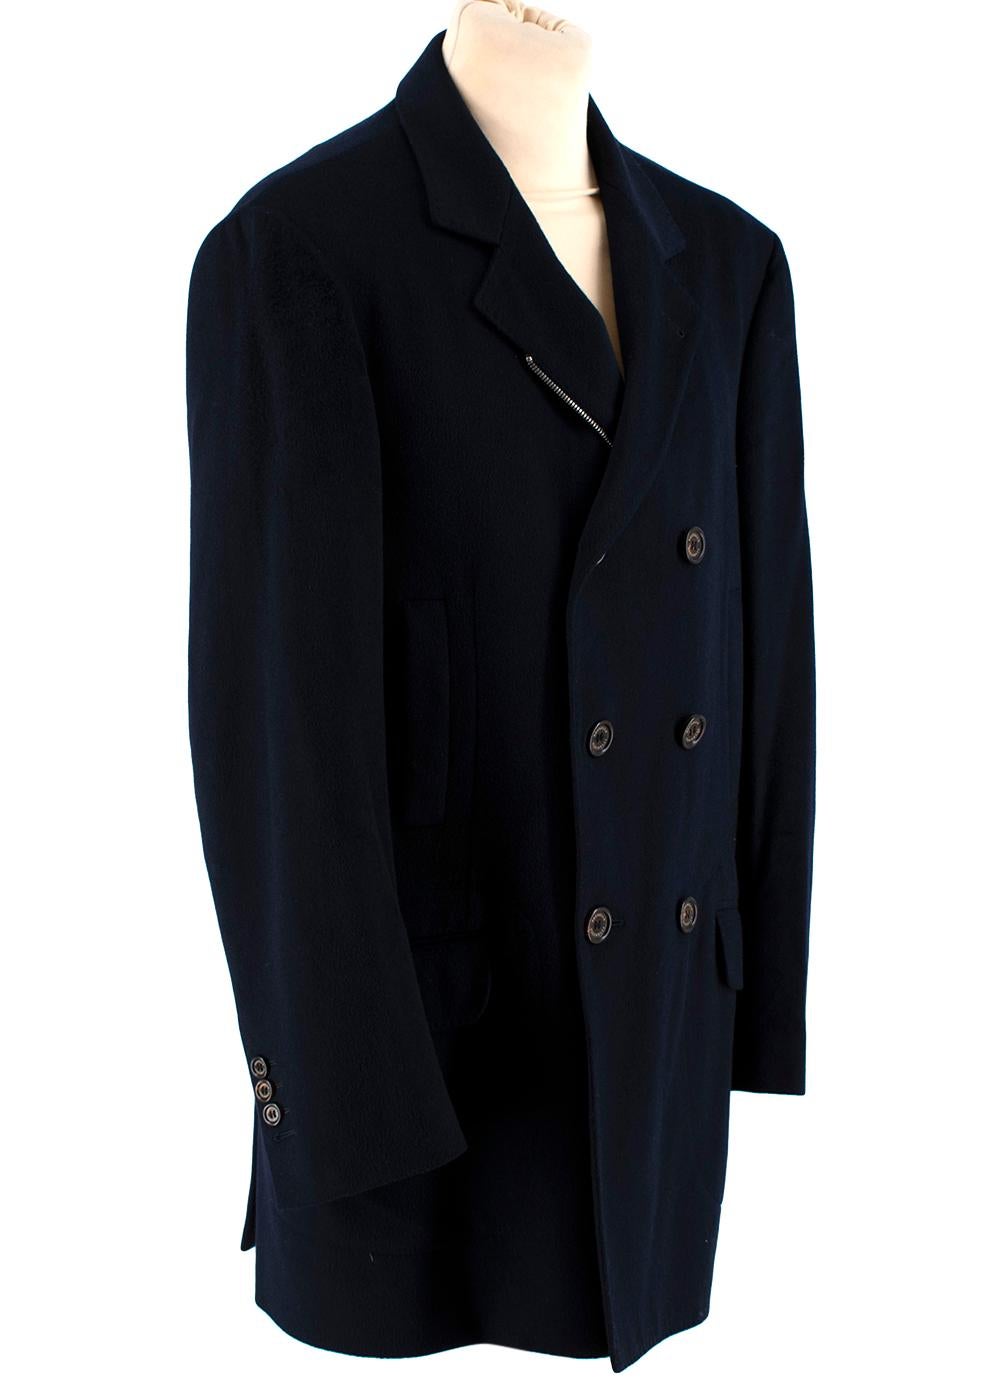 Brunello Cucinelli Navy Cashmere Double Breasted Coat

-Luxurious soft touch 
-Both Buttons and zip fastening for extra comfort
-Classic cut with modern accents
-4 functional outer pockets 
-5 inner pockets, one of them for pens.
-Fully lined